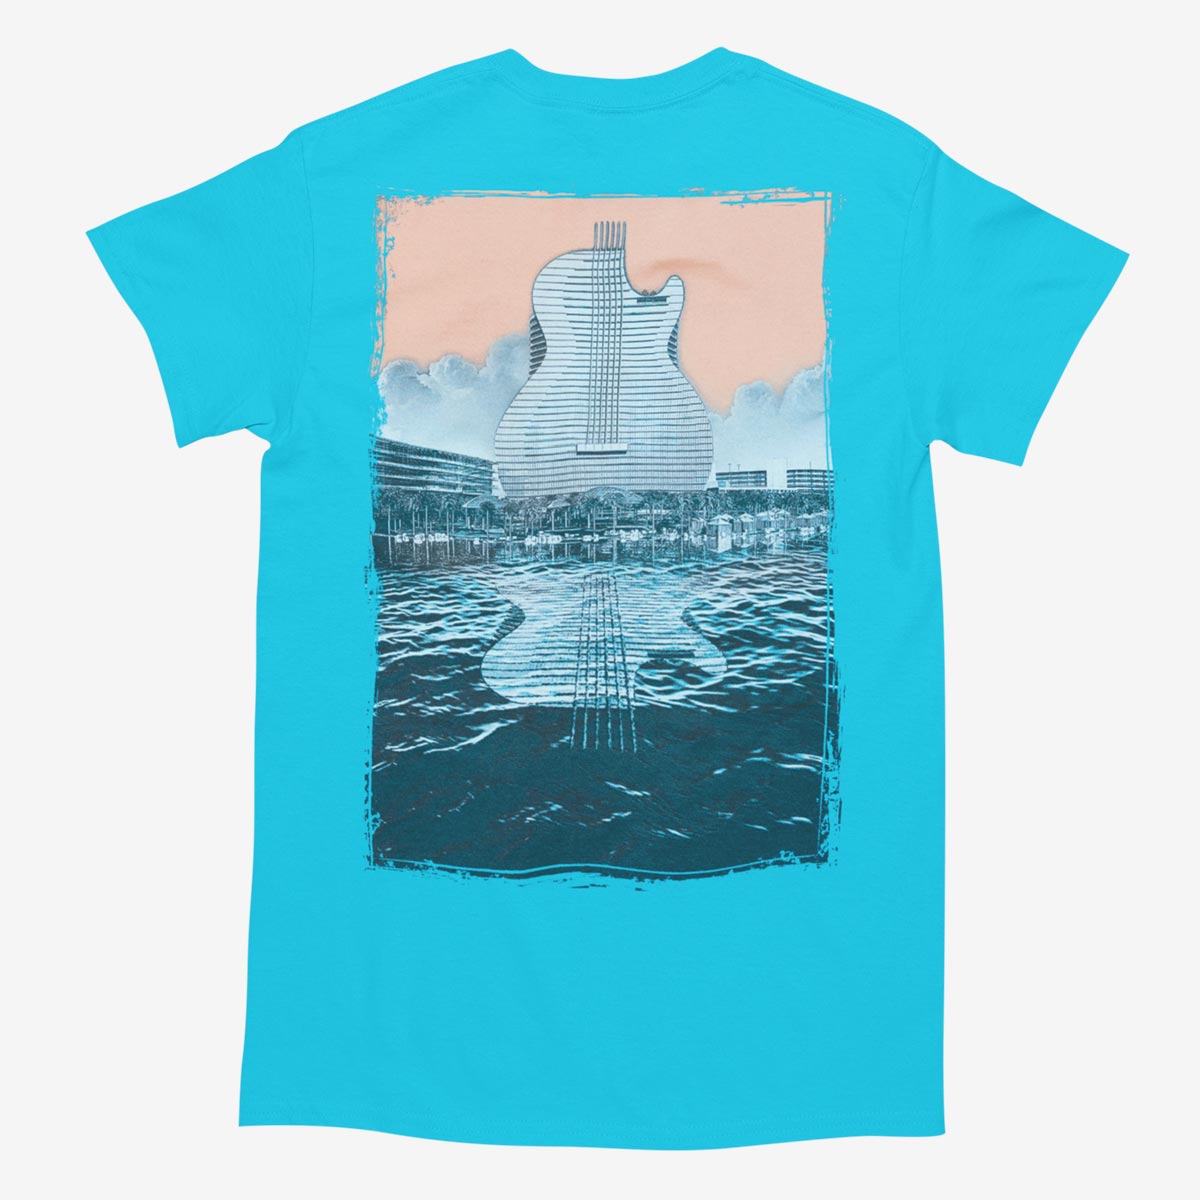 Guitar Hotel Adult Fit Tee in Aqua with Reflection Design image number 2